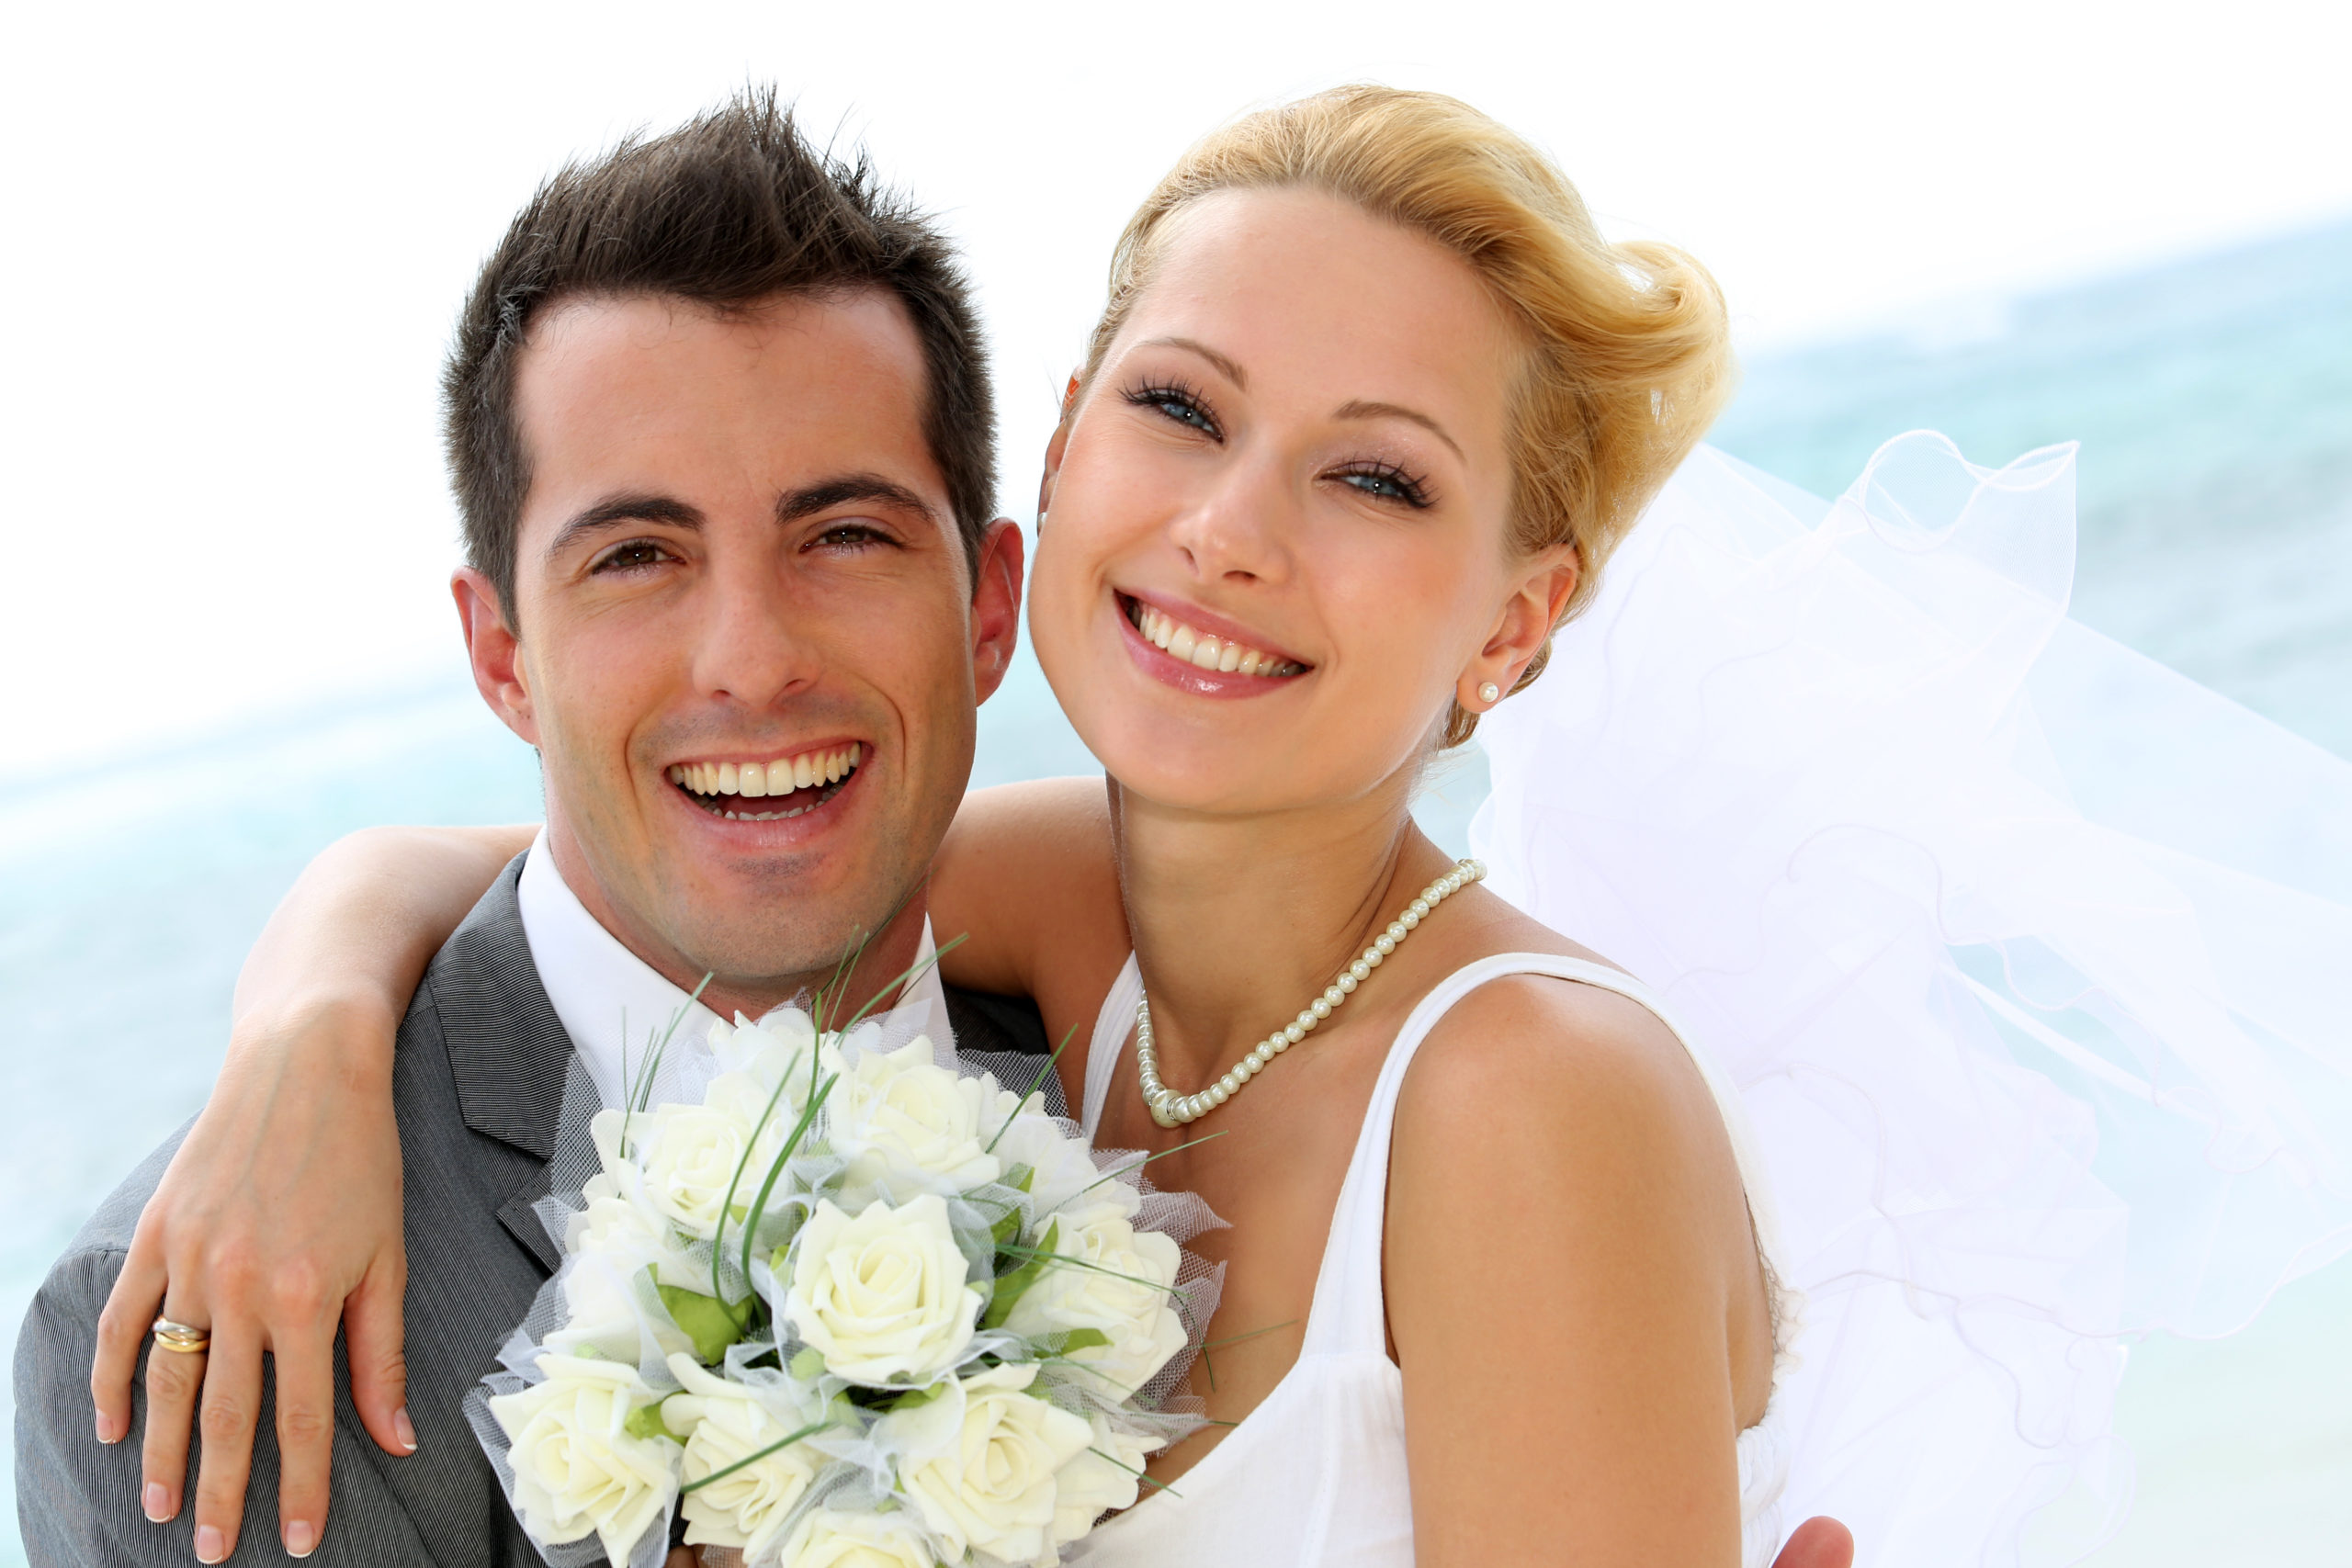 Bride and Groom holding each other smiling with white bouquet